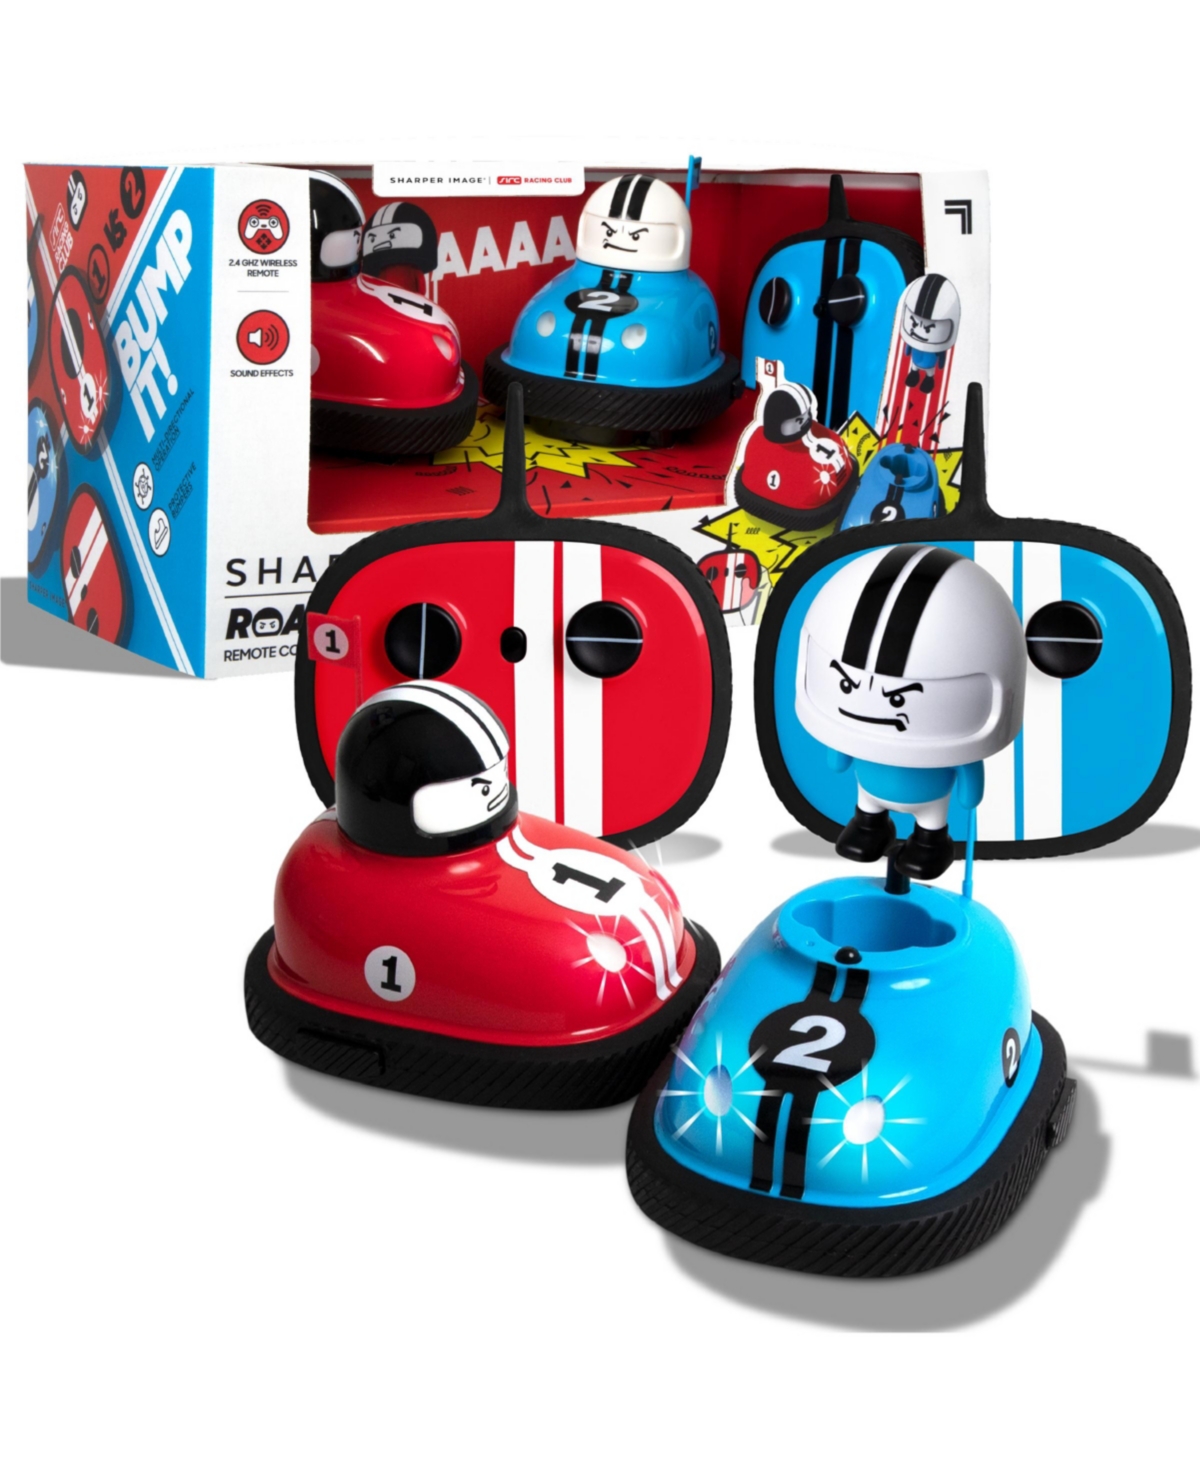 Sharper Image Road Rage Rc Speed Bumper Cars In Red And Blue